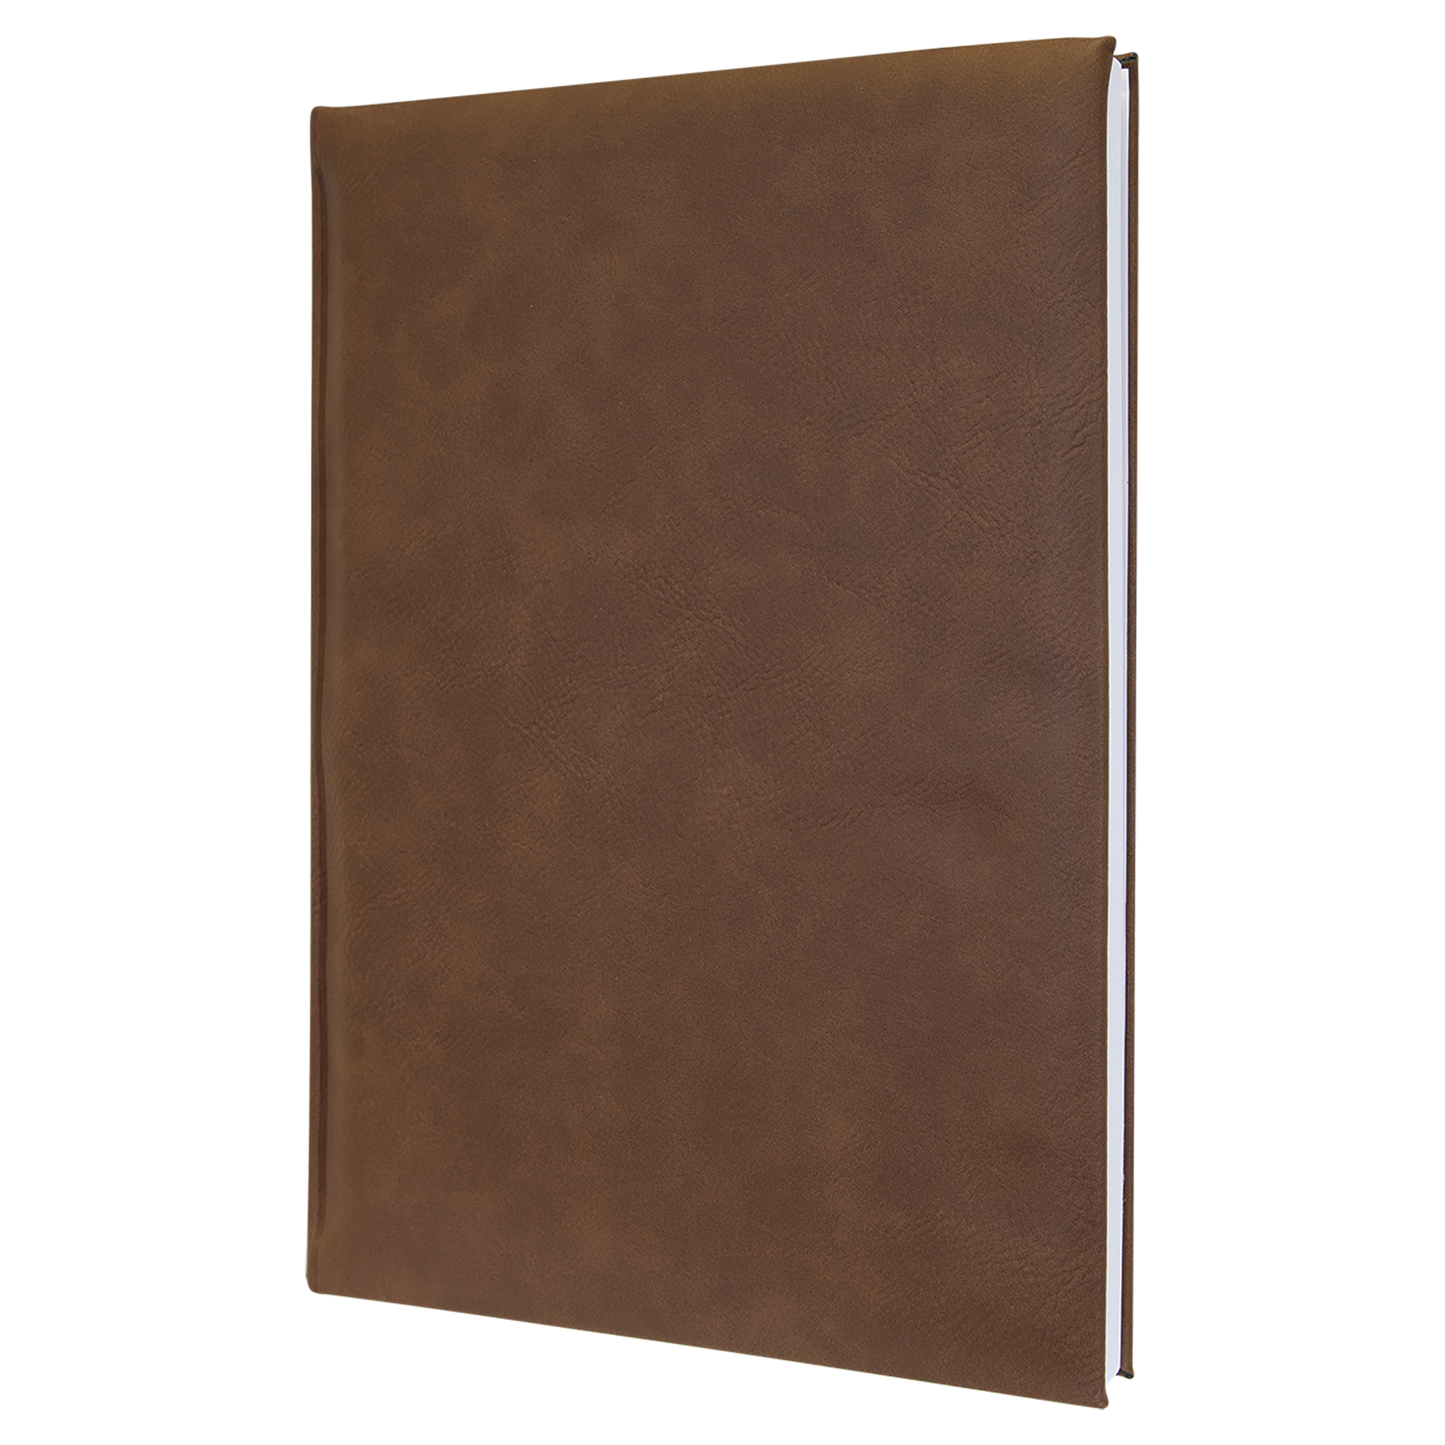 7" x 9 3/4" Dark Brown Laserable Leatherette Sketch Book with Unlined Notepad - Beacon Laser Creations LLC